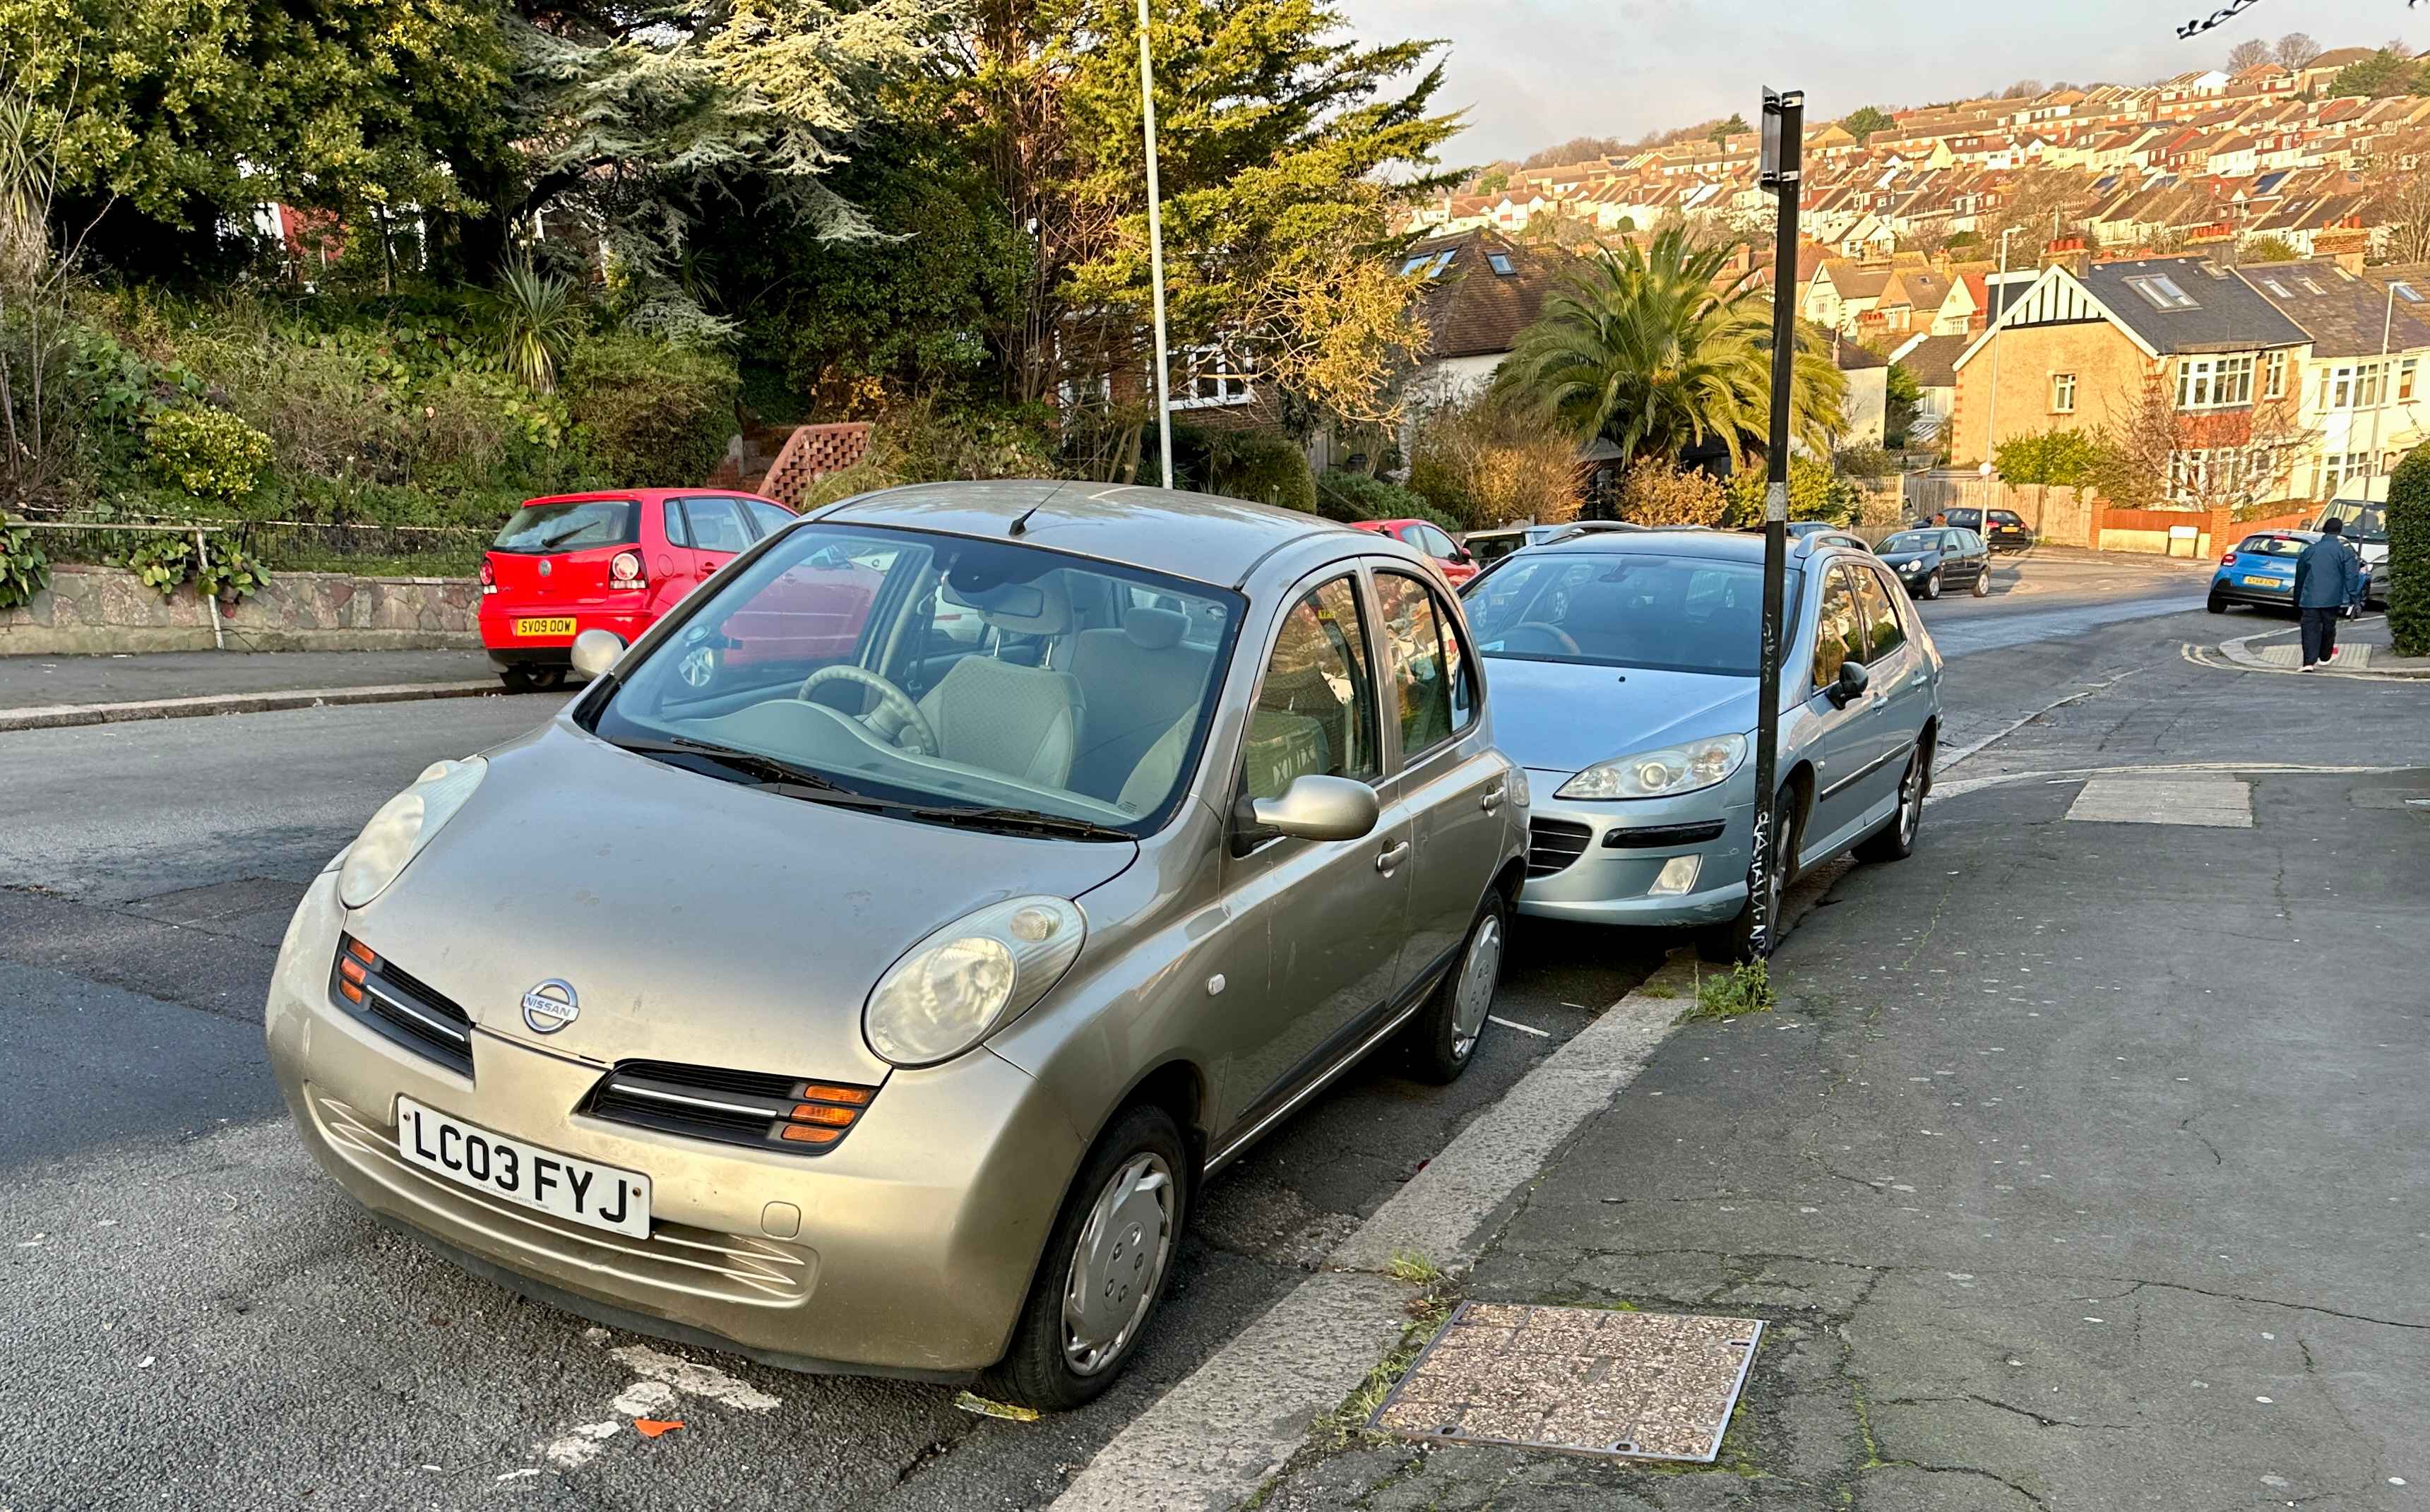 Photograph of LC03 FYJ - a Gold Nissan Micra parked in Hollingdean by a non-resident, and potentially abandoned. The tenth of seventeen photographs supplied by the residents of Hollingdean.